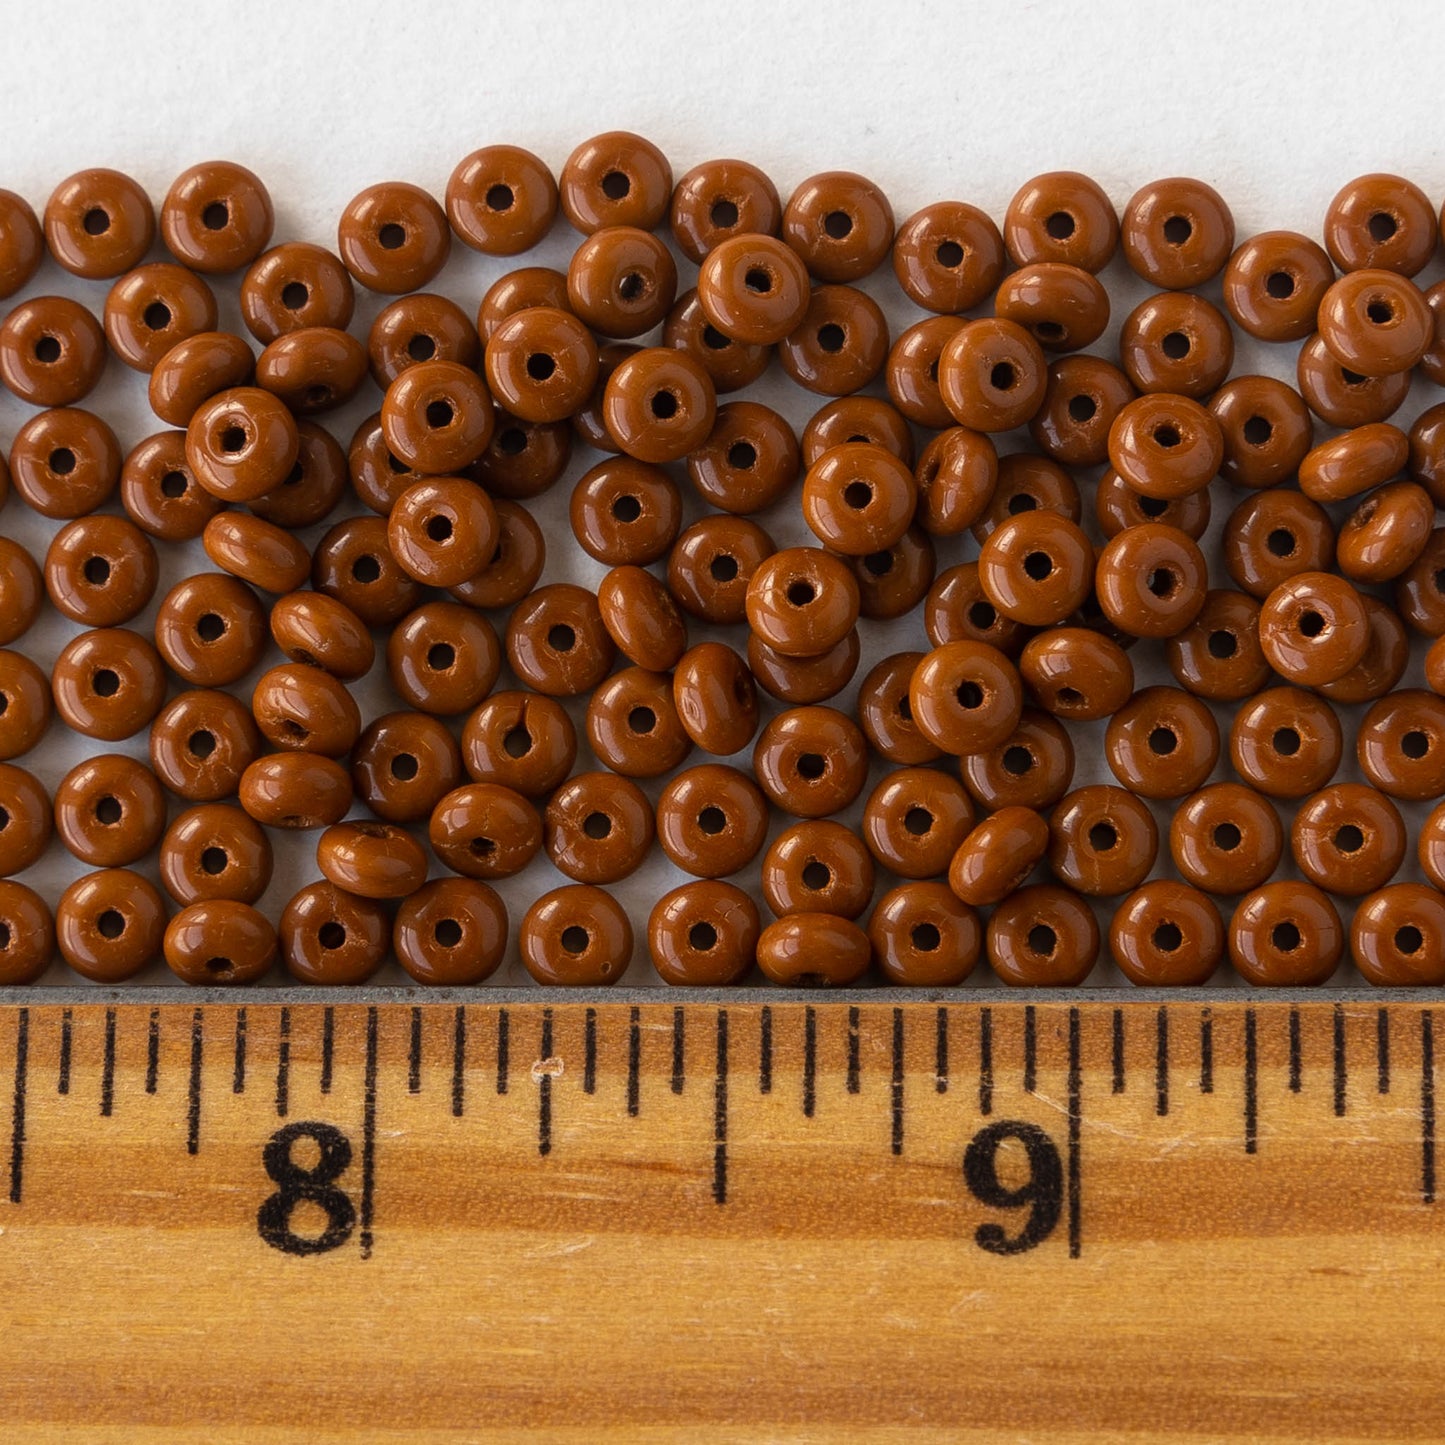 4mm Glass Rondelle Beads - Opaque Brown - 120 Beads